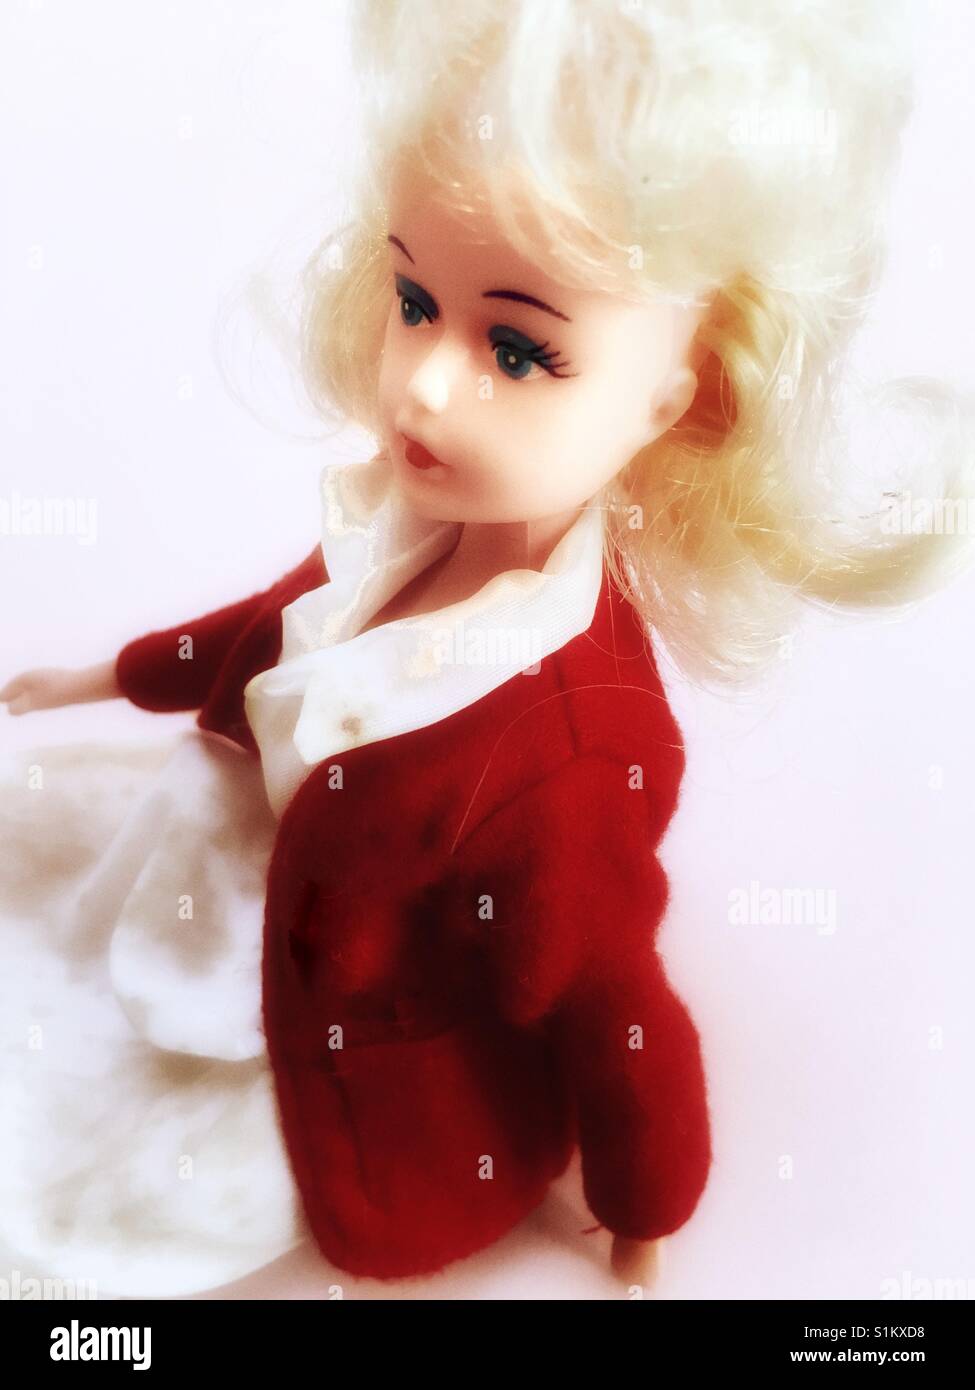 Blonde haired doll from 1970's (Butlins holiday red coat) Stock Photo